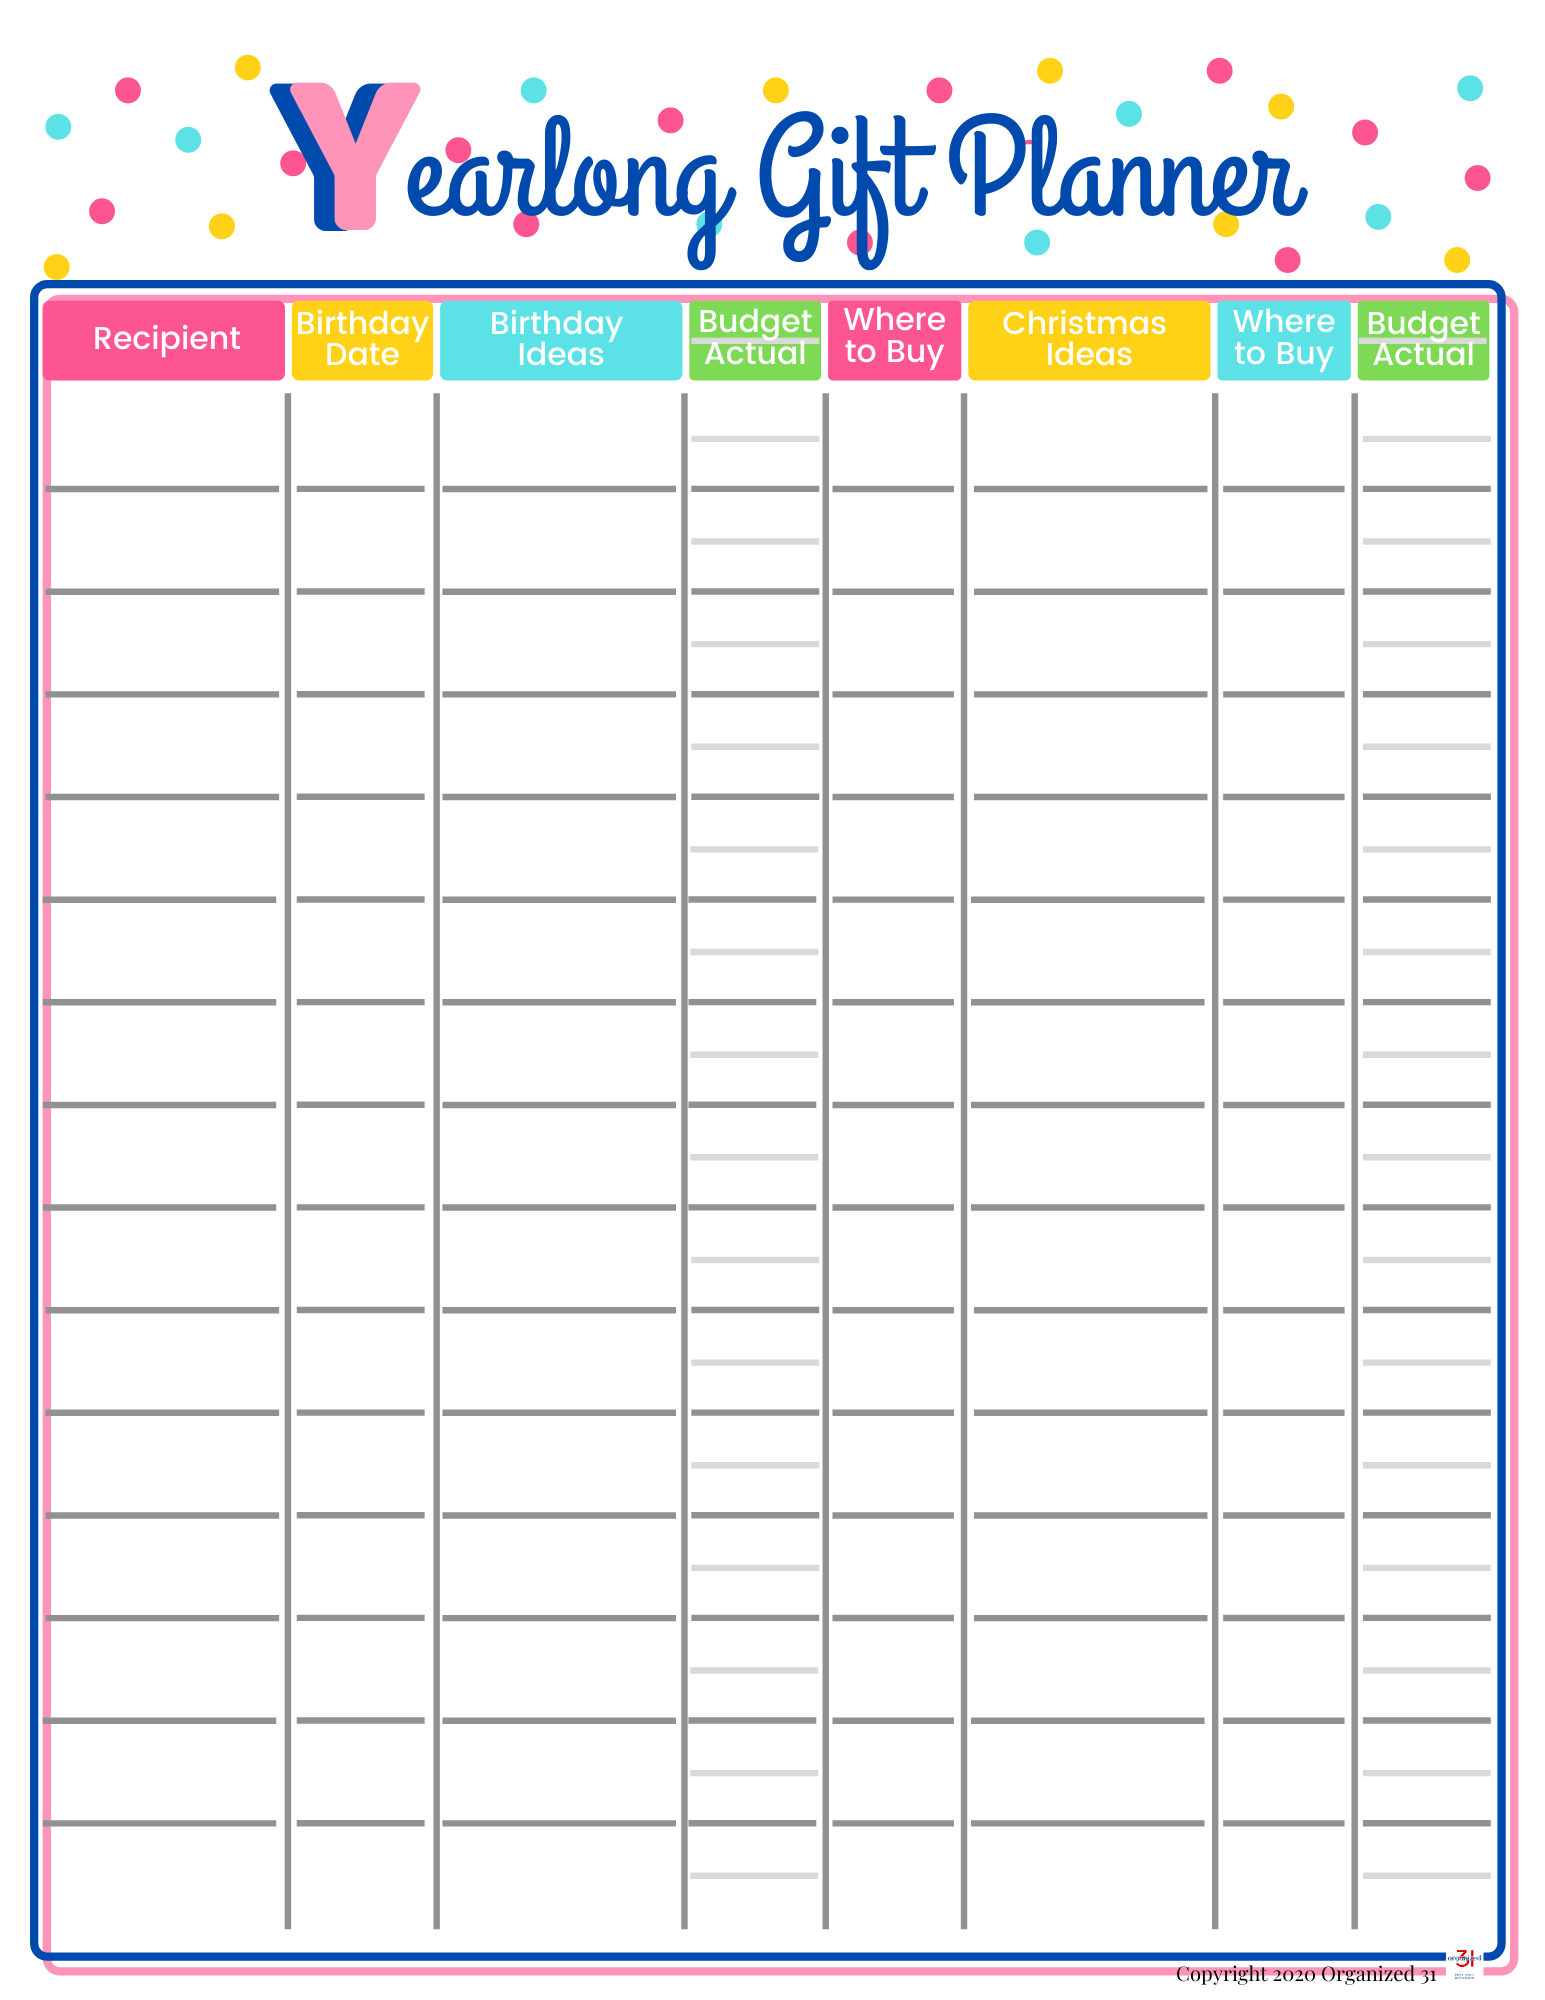 An Organized 31 Shop Yearlong Gift Planner Checklist Printable featuring polka dots.